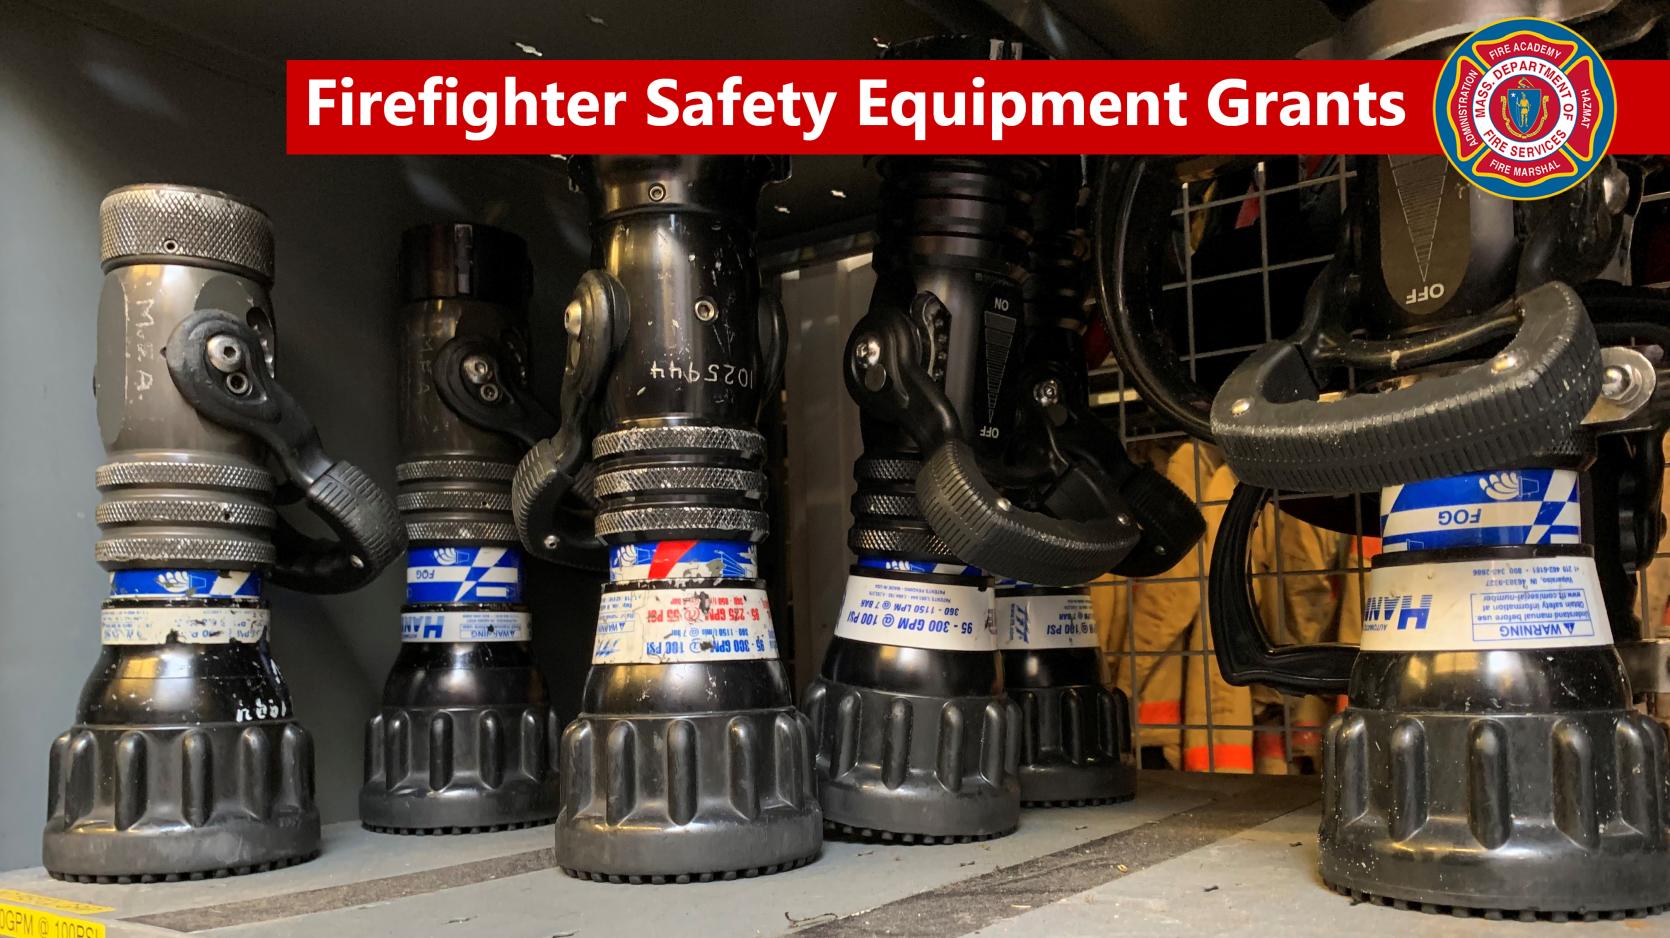 Photo of firehose nozzles with the words Firefighter Safety Equipment Grants